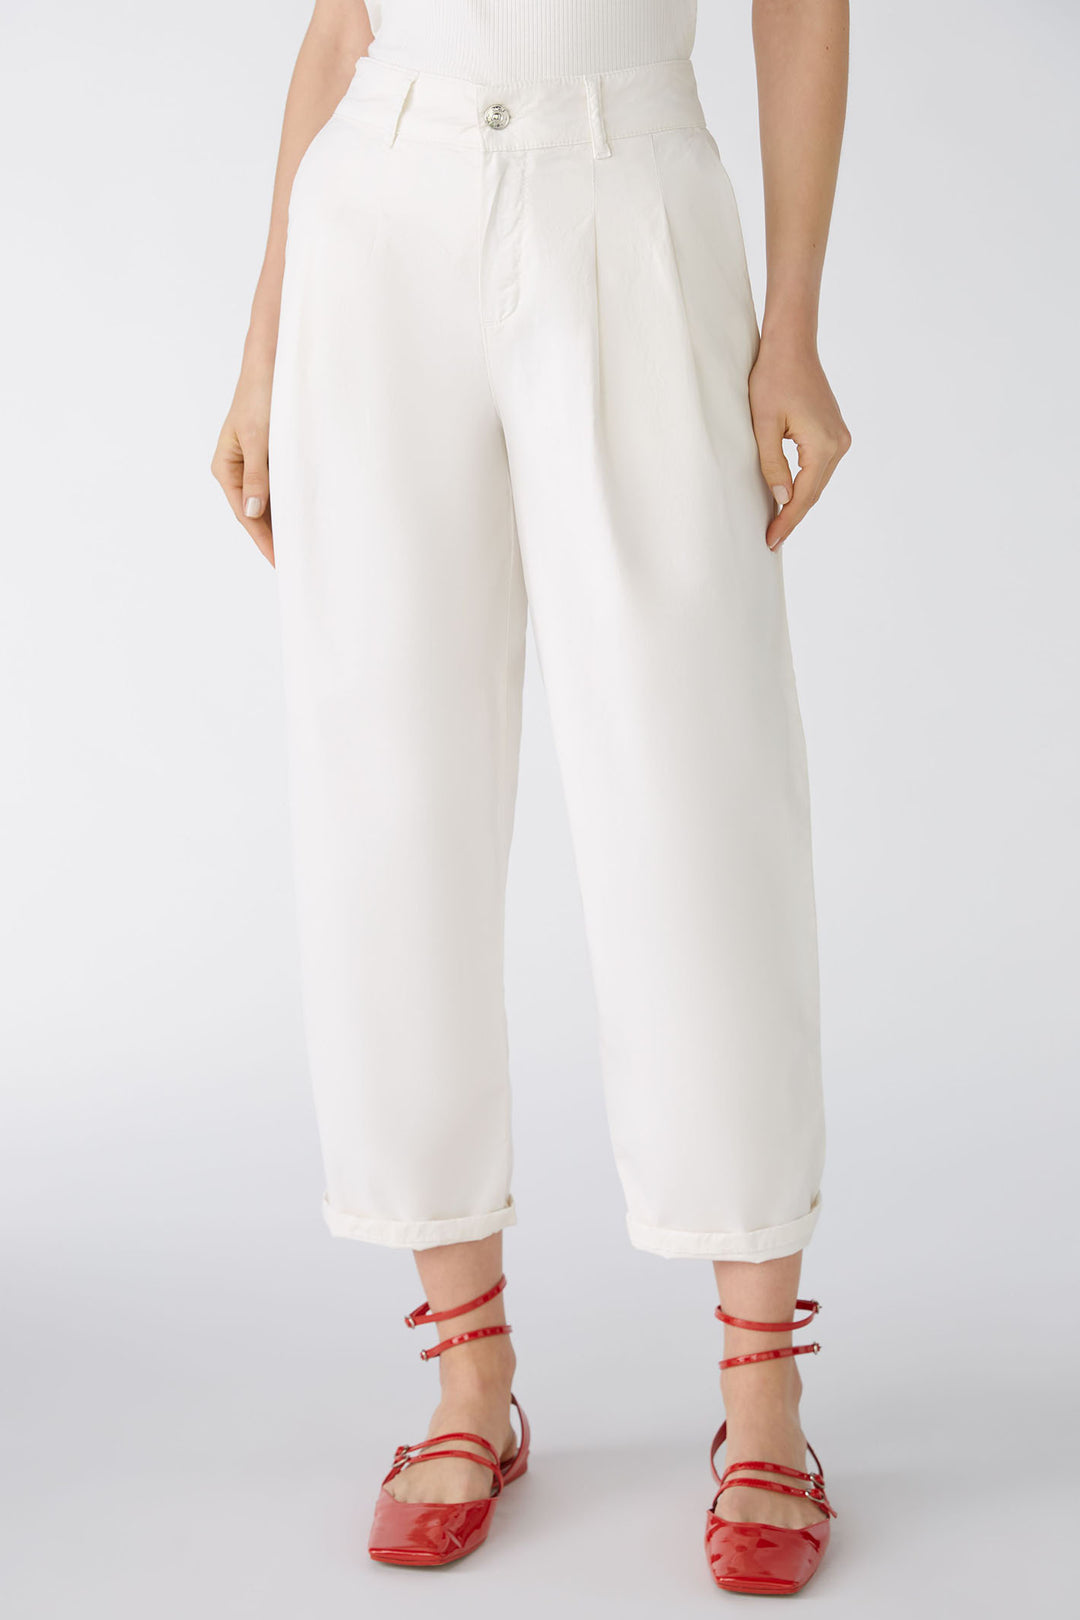 Oui 87175 Offwhite Relaxed Fit Trousers - Olivia Grace Fashion